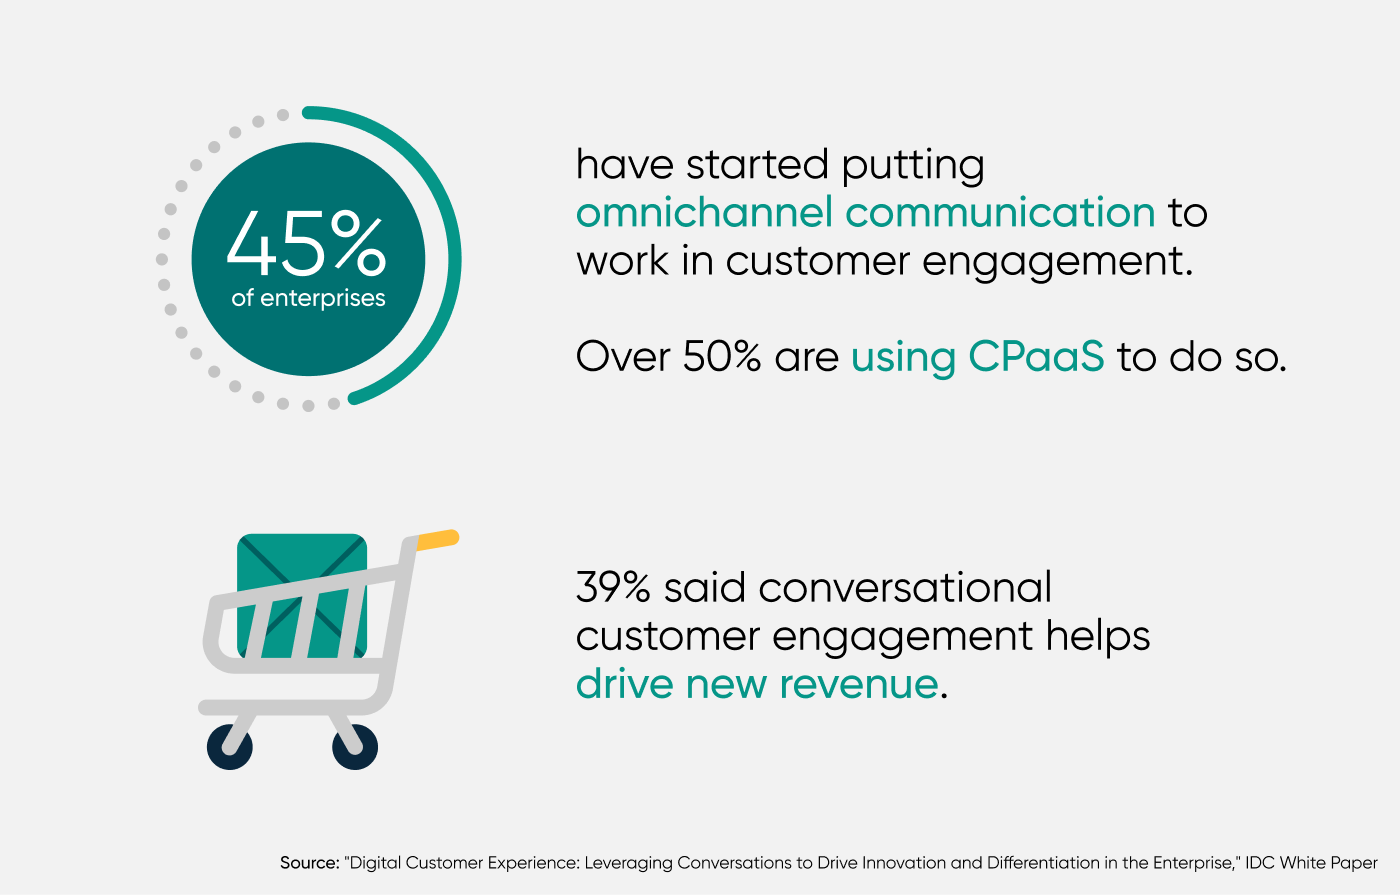 infographic showing 45% of enterprises have started putting omnichannel communication to work in customer engagement